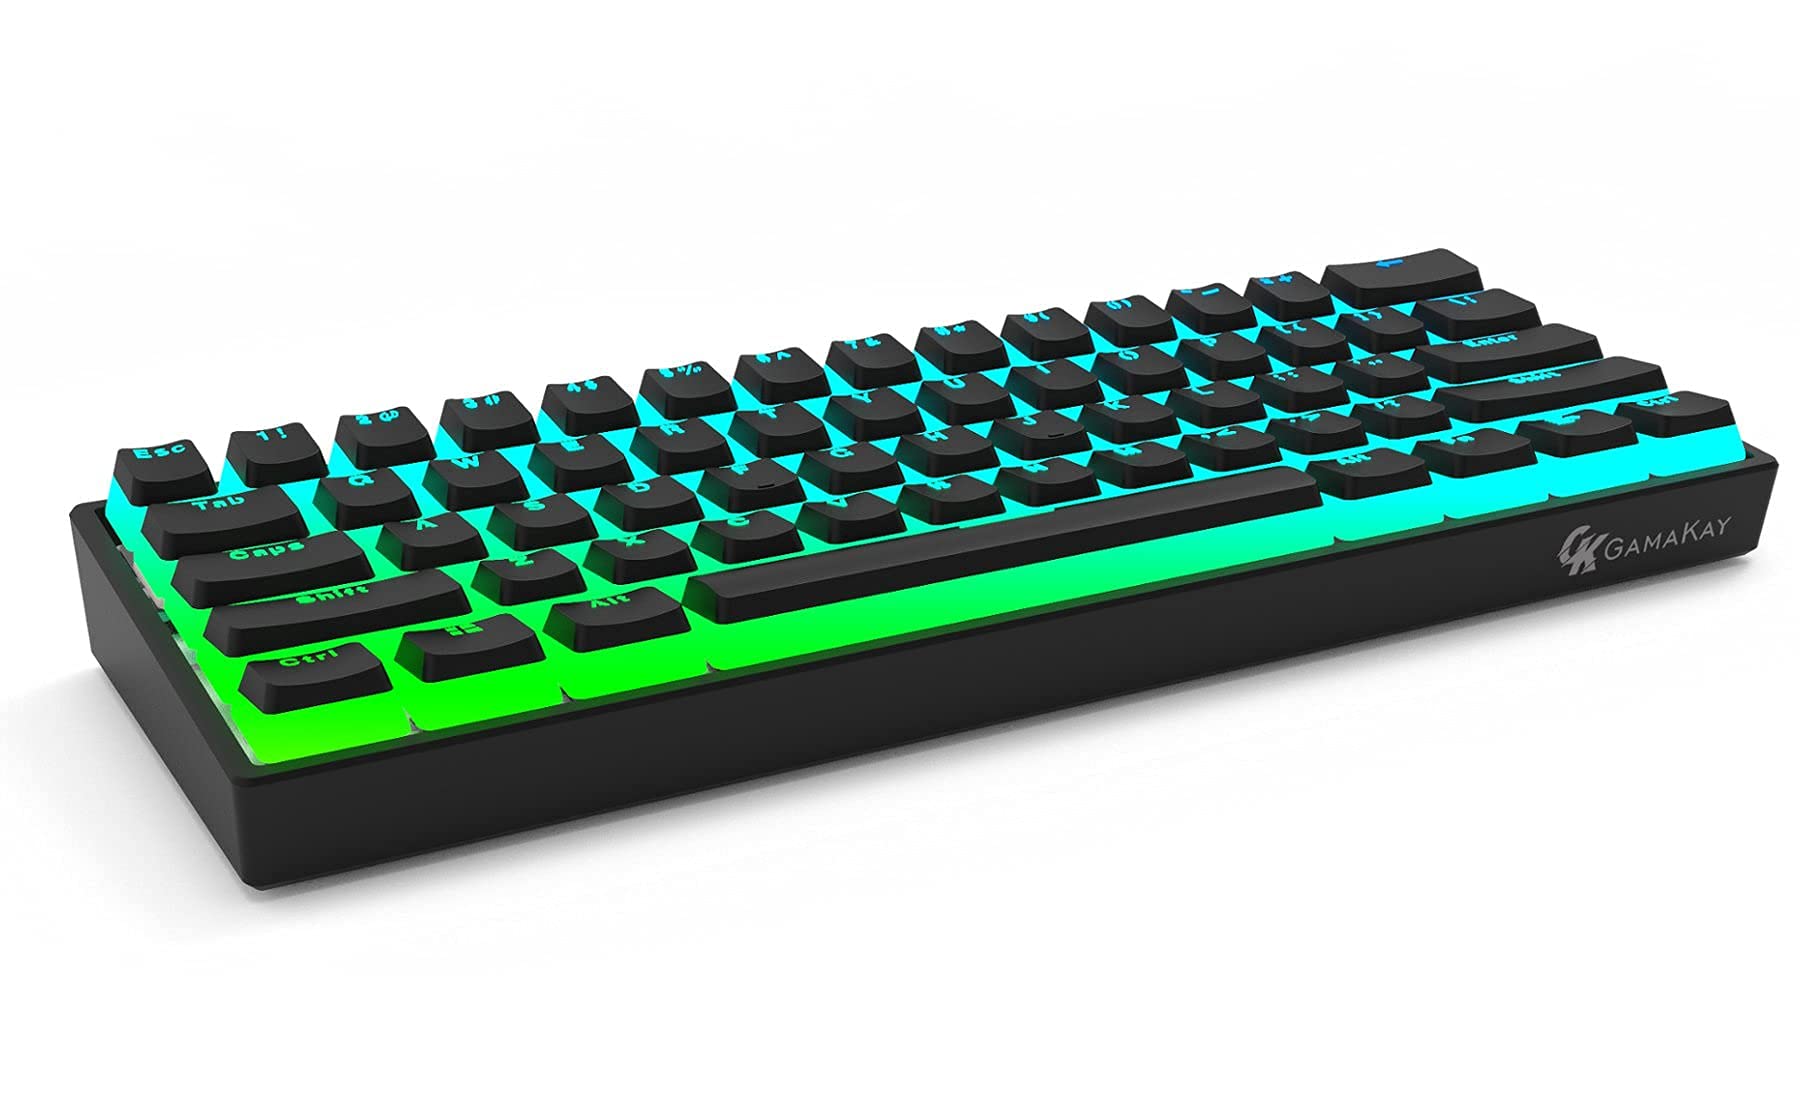 GK GAMAKAY MK61 RGB Pudding Keyboard, 61 Keys Gateron Optical Switch PBT Pudding Keycaps, Hot Swappable Backlit Ultra-Compact Wired Gaming Keyboard fo